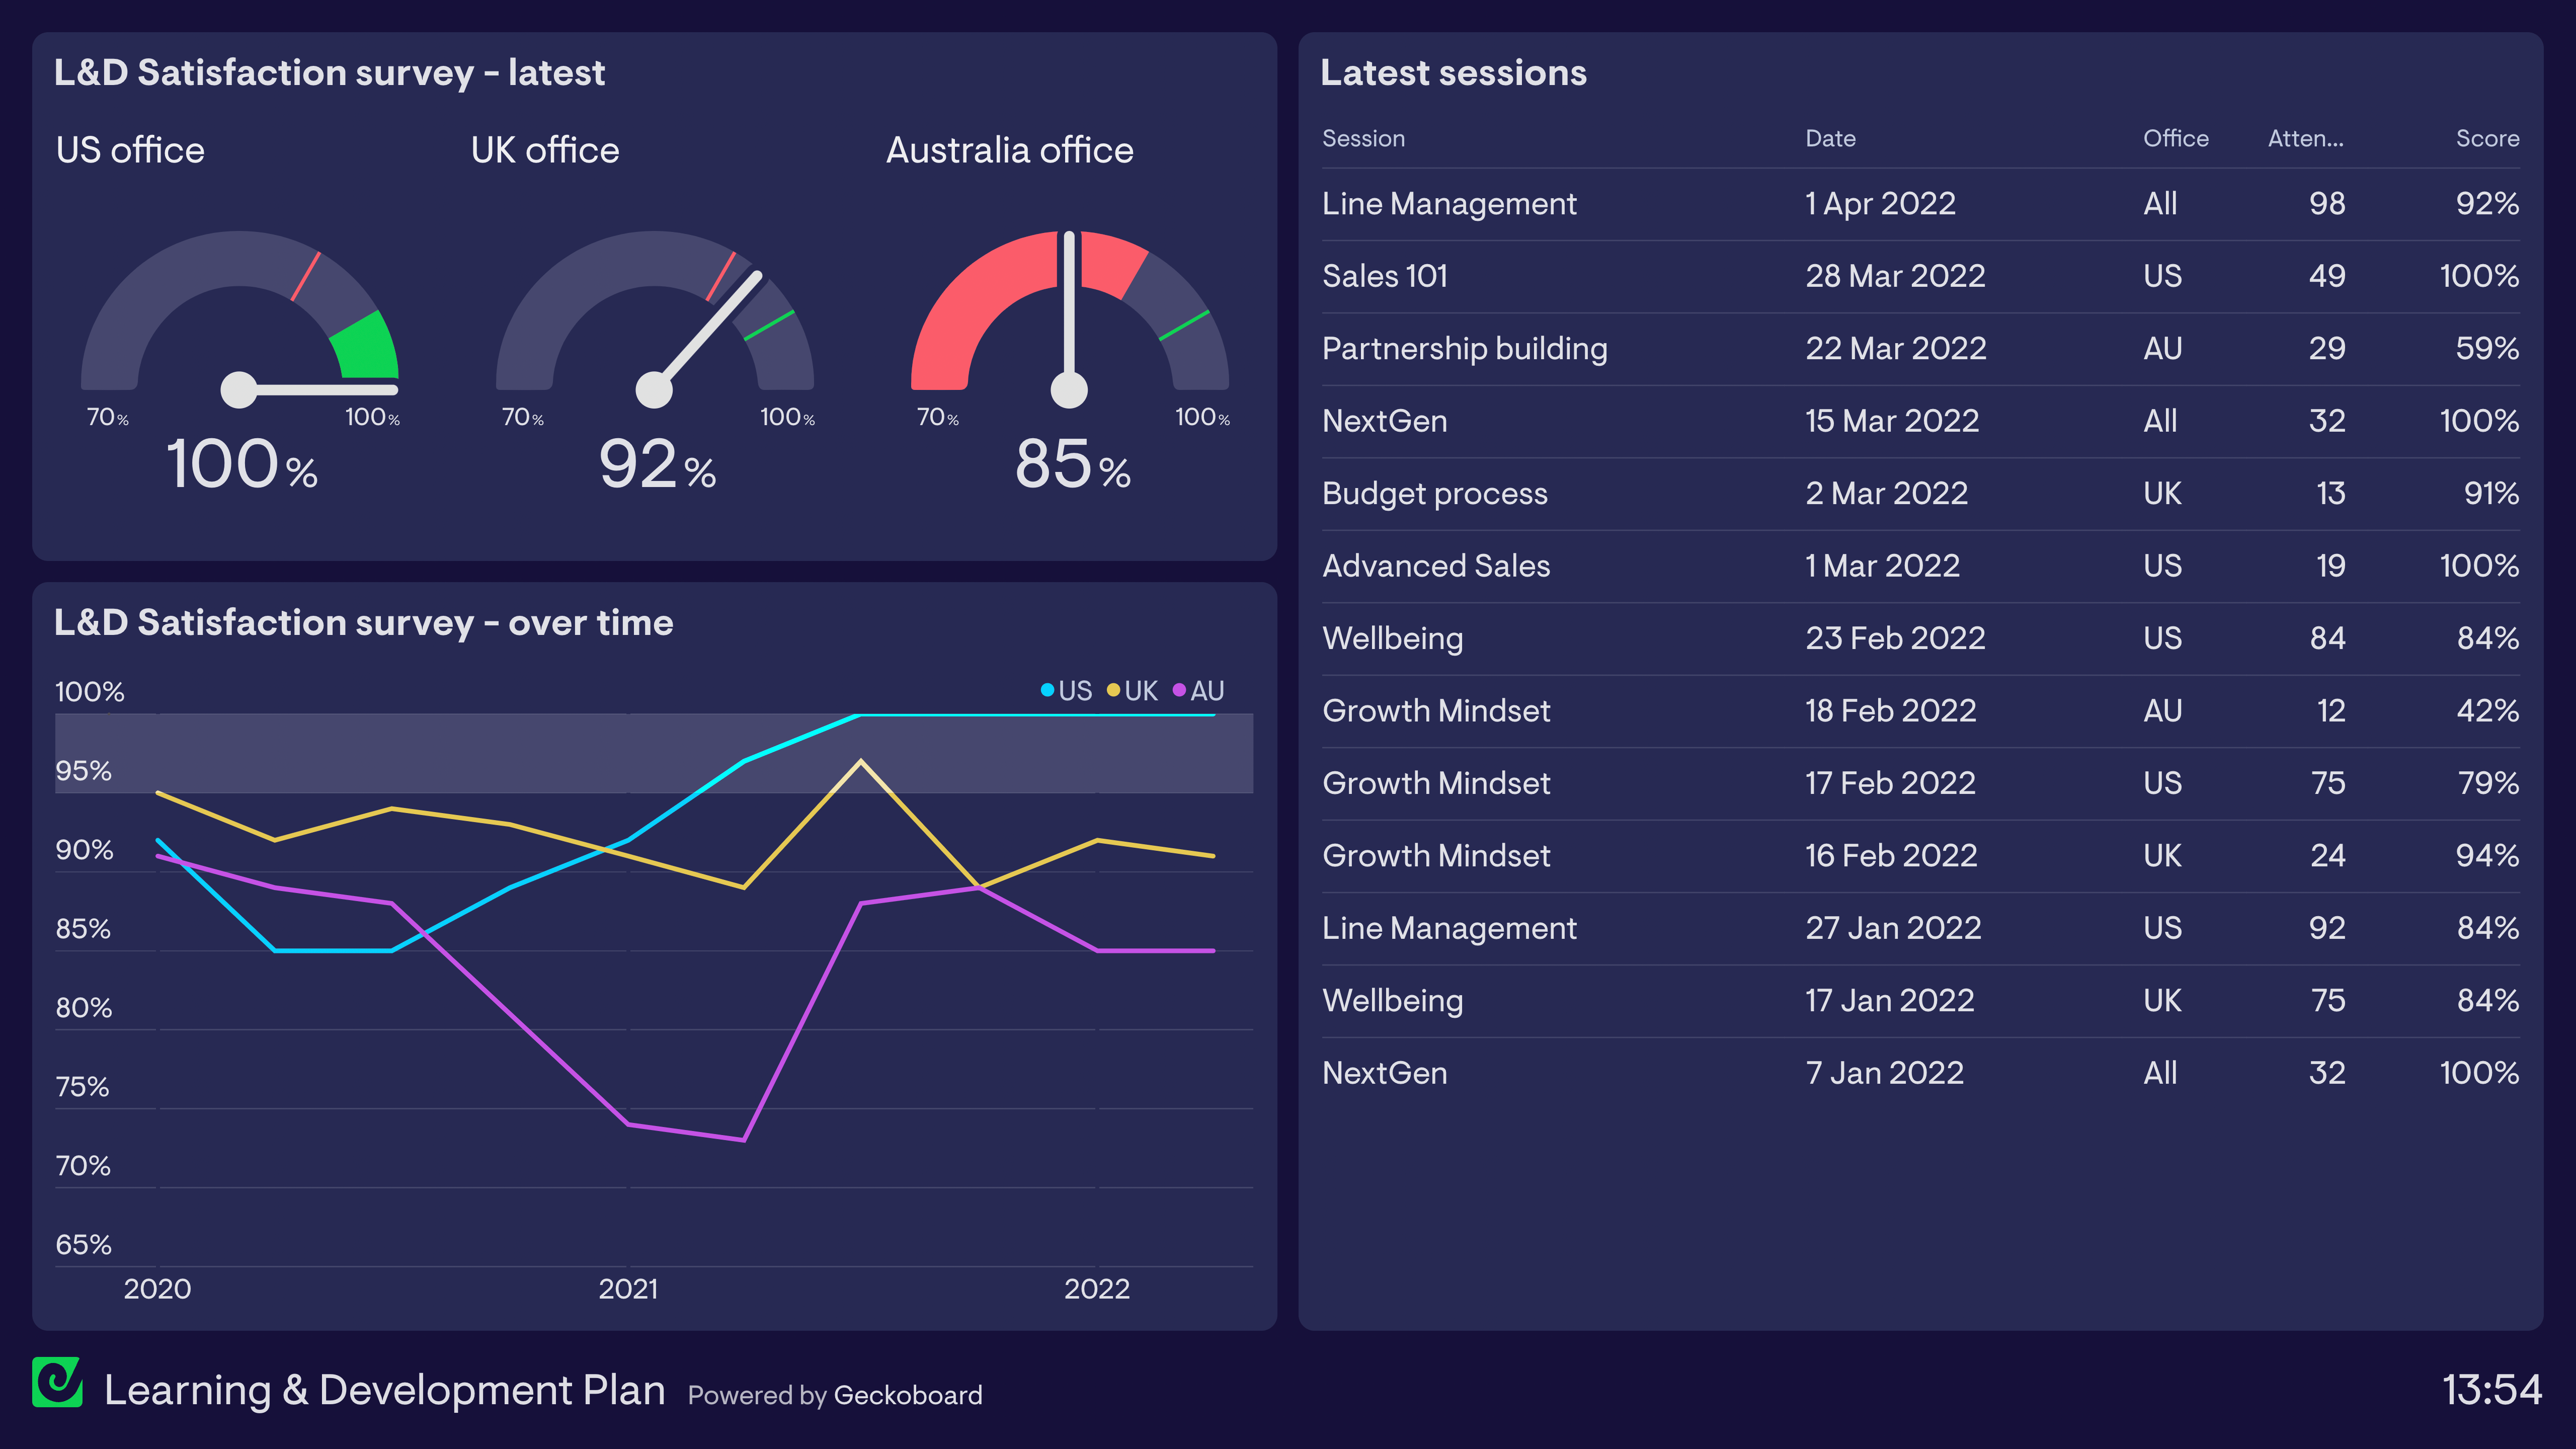 HR dashboard example